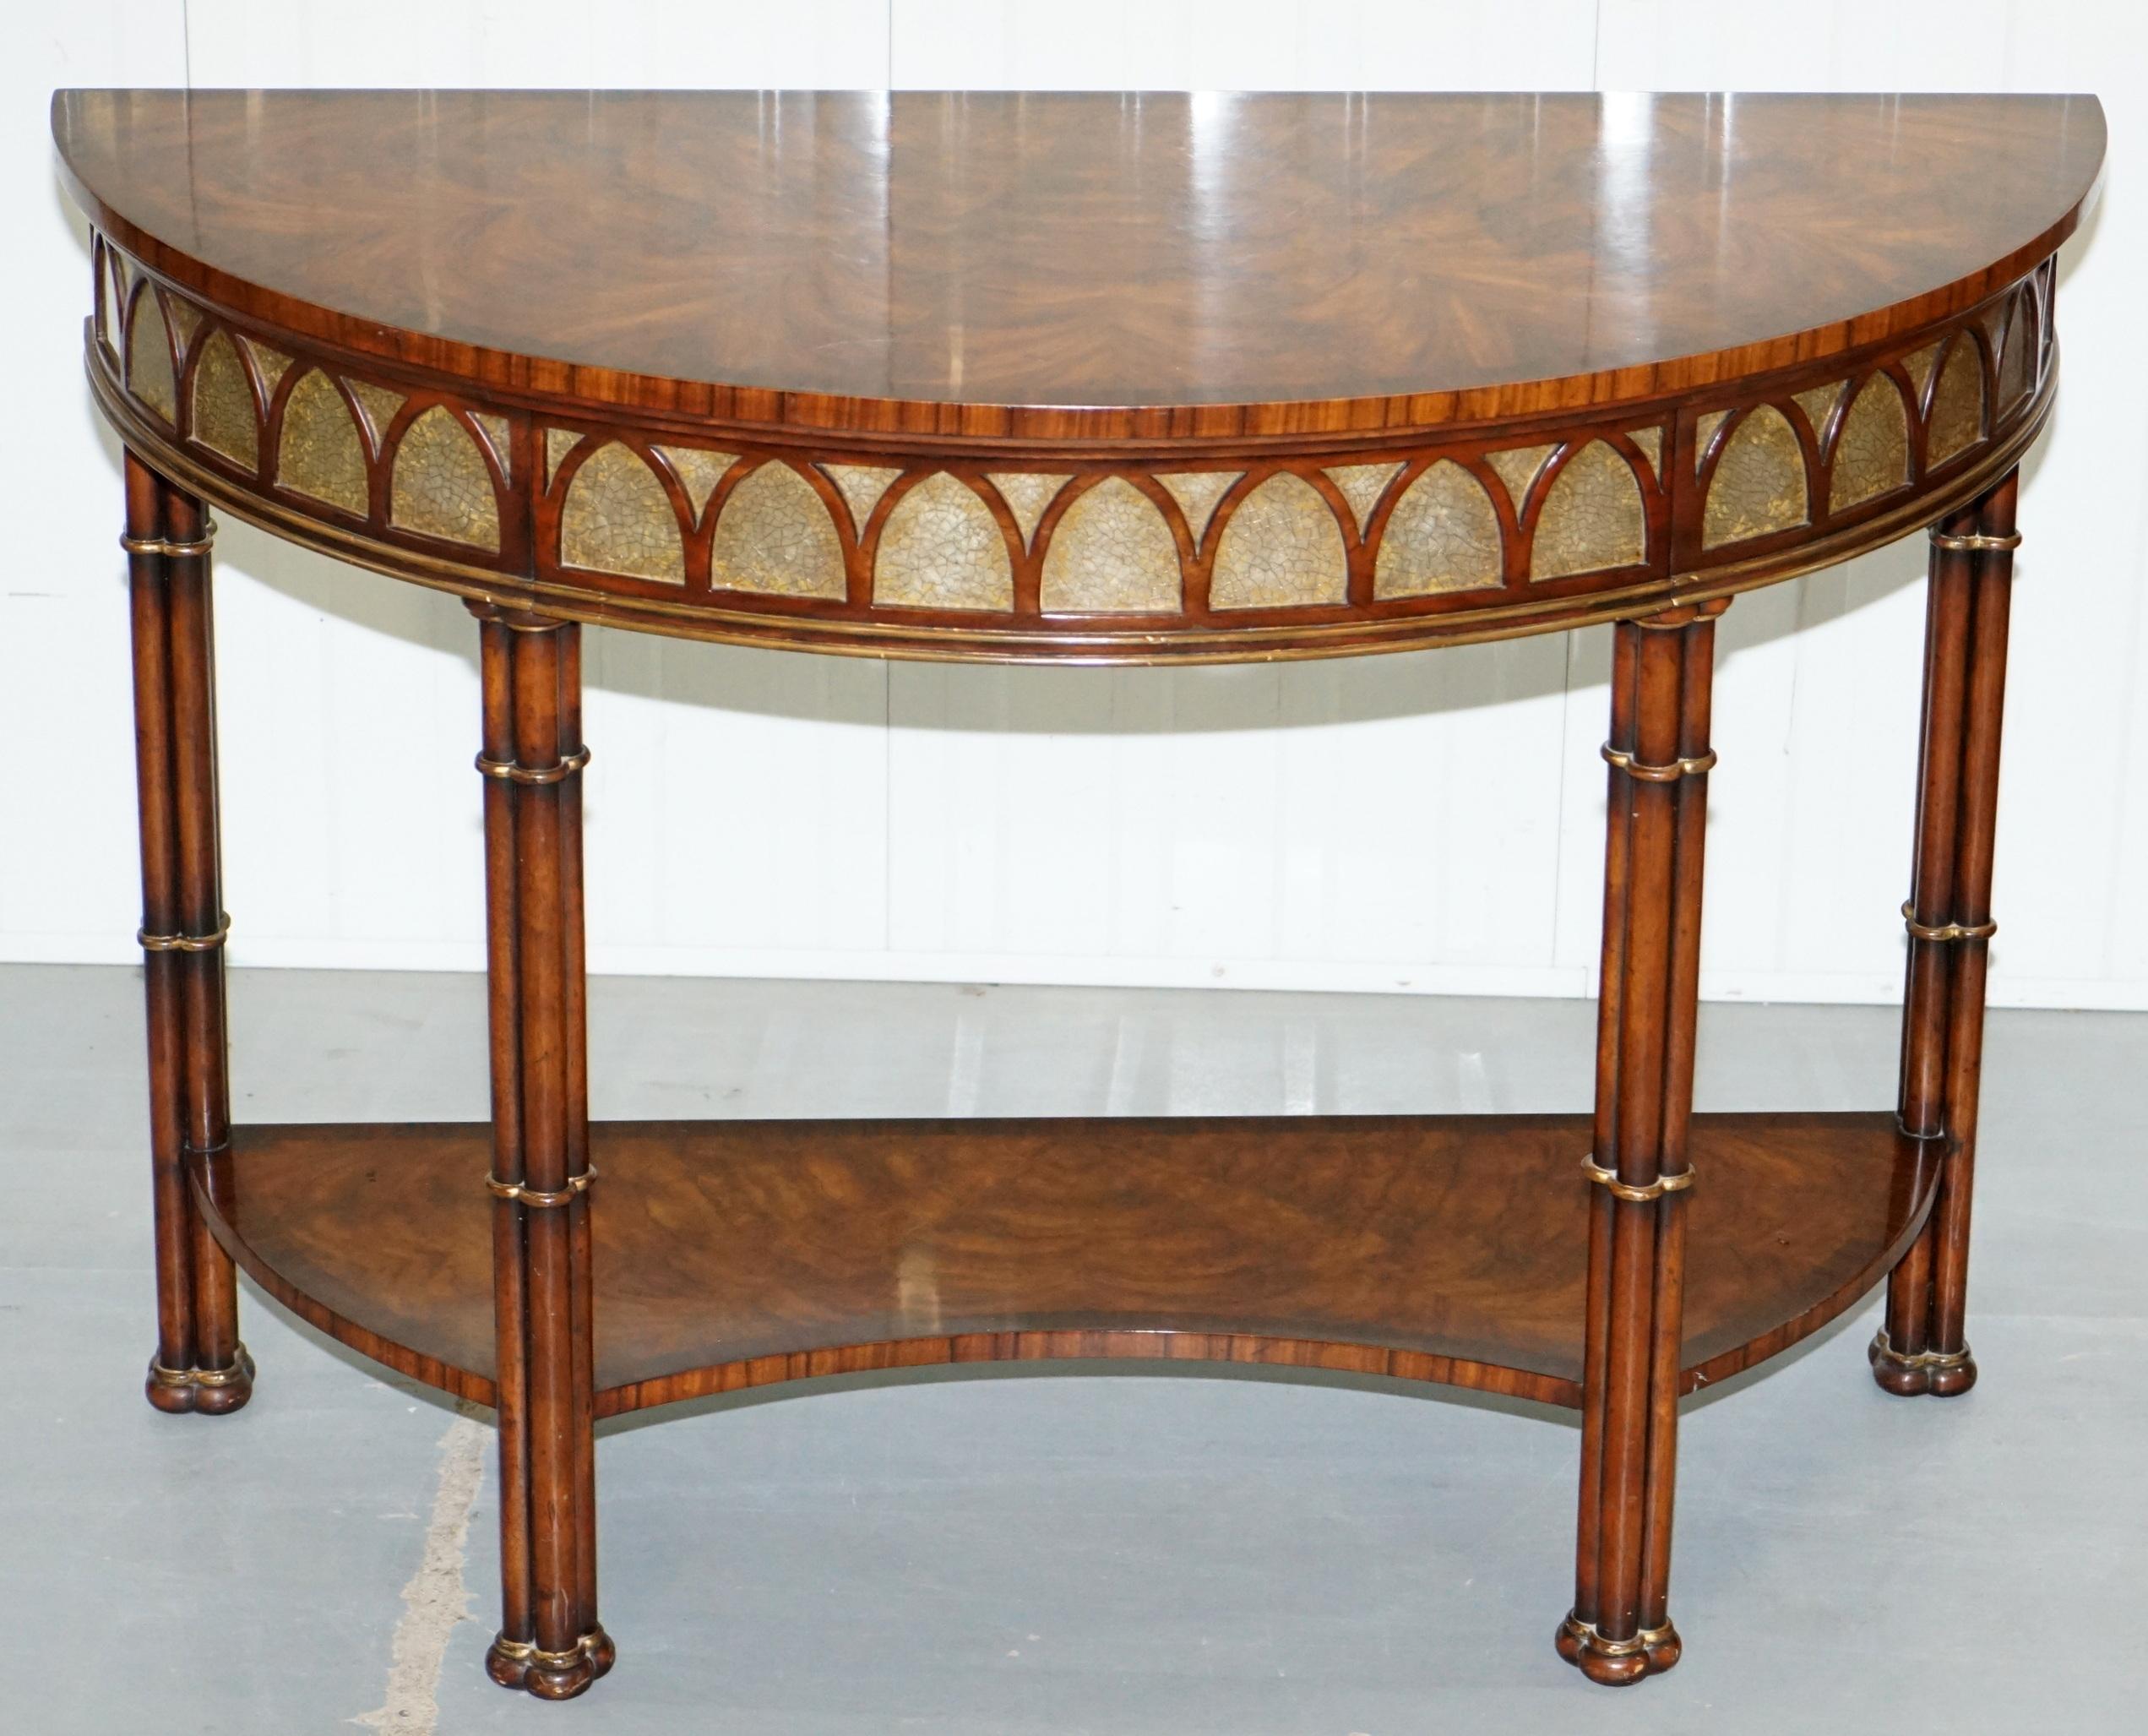 We are delighted to offer for sale this very ornate Theodore Alexander Demi Lune console tables made in the style of Thomas Chippendale.

A very good looking and well-made piece, the luxury timber is exotically patinaed throughout, the top looks